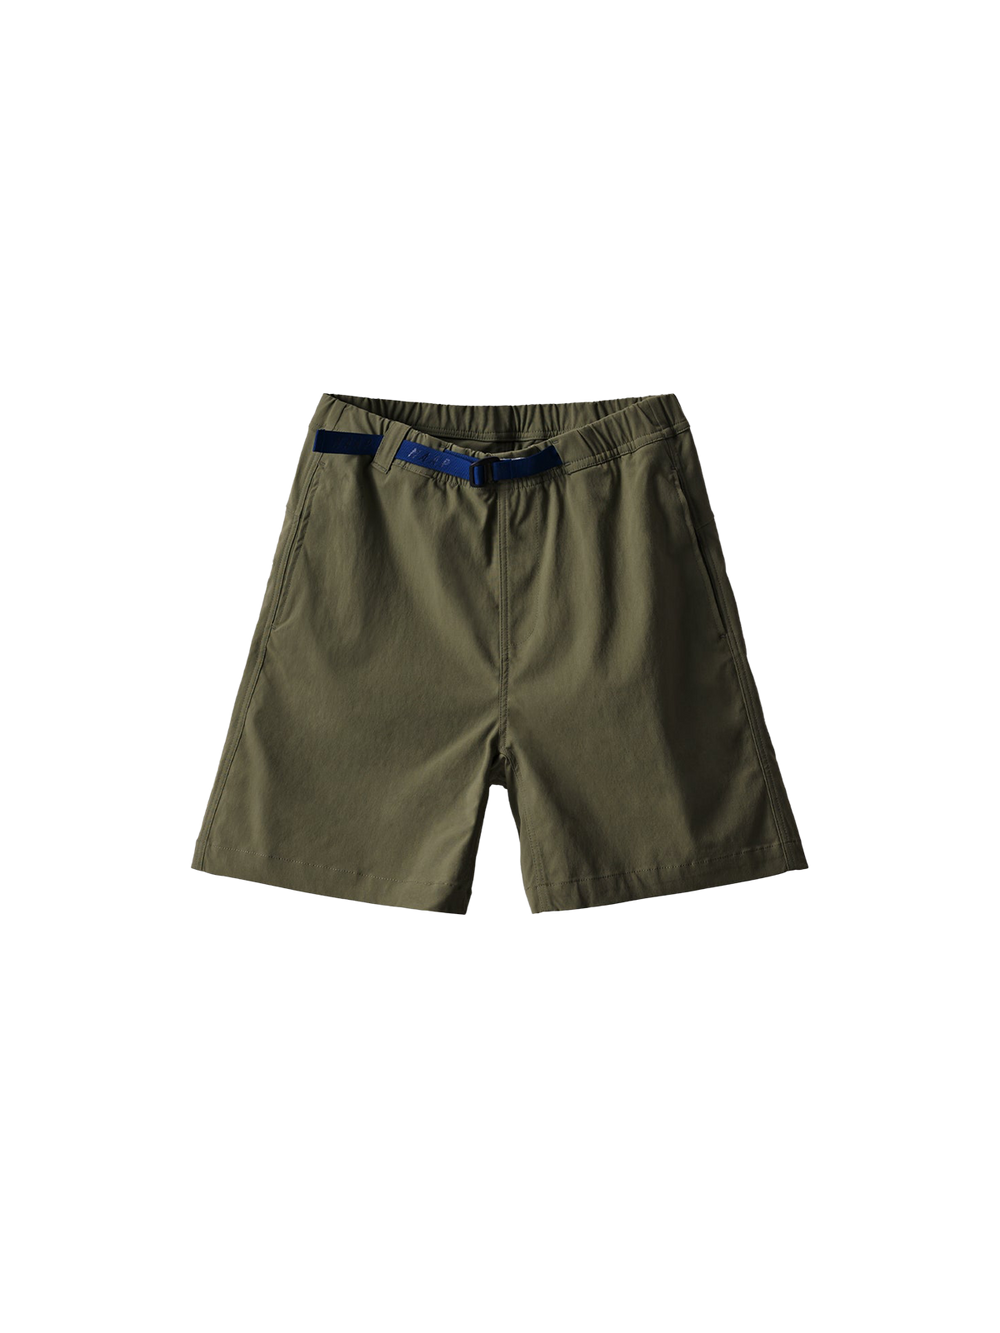 Product Image for Phase Short